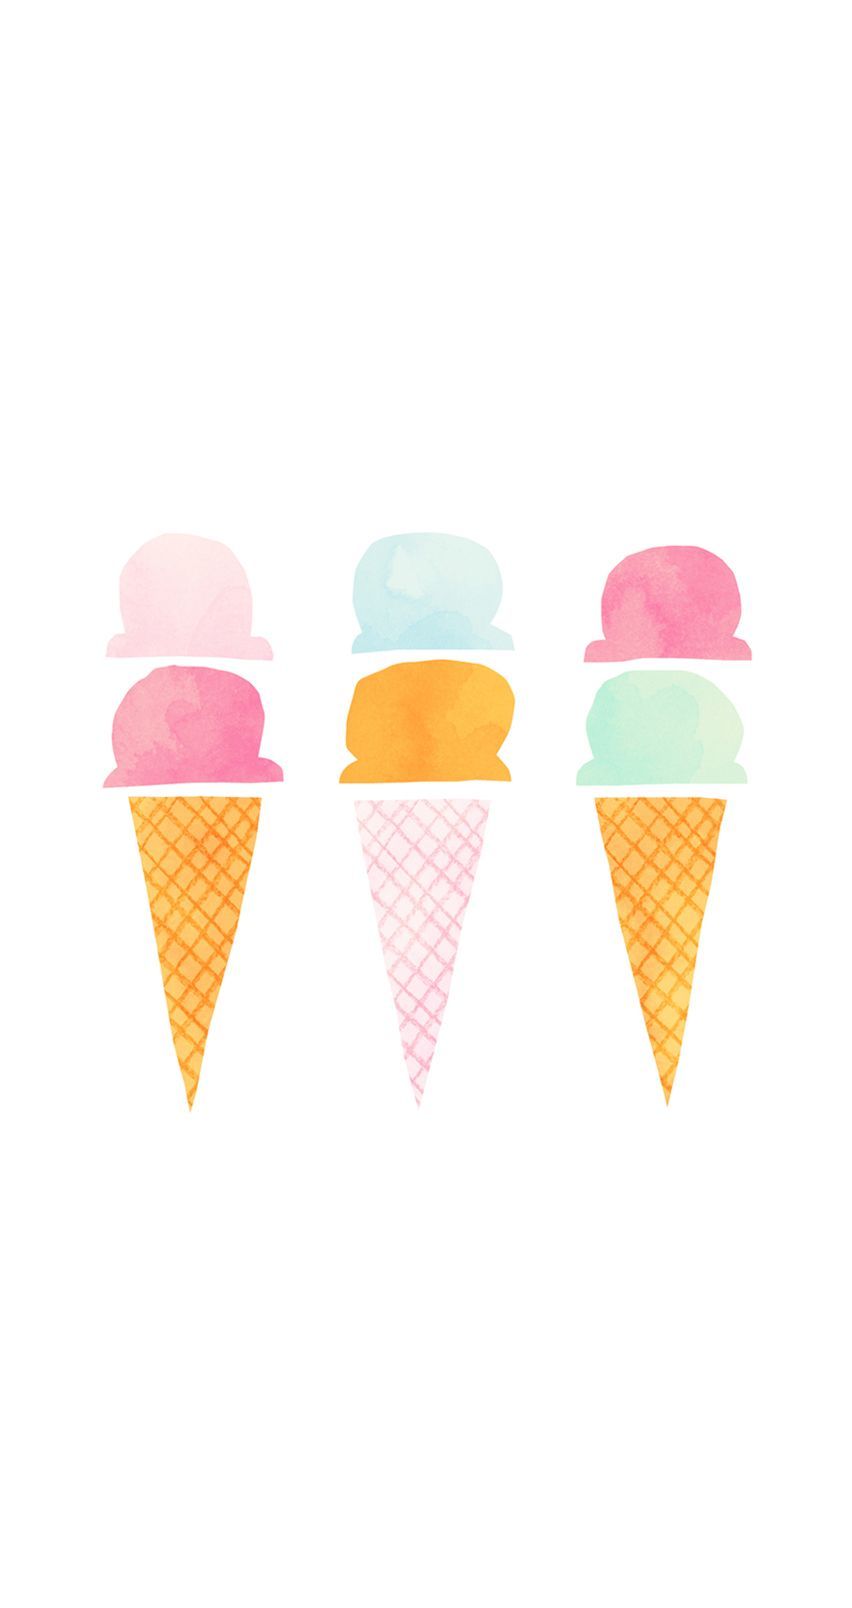 Cute Ice Cream iPhone Wallpapers